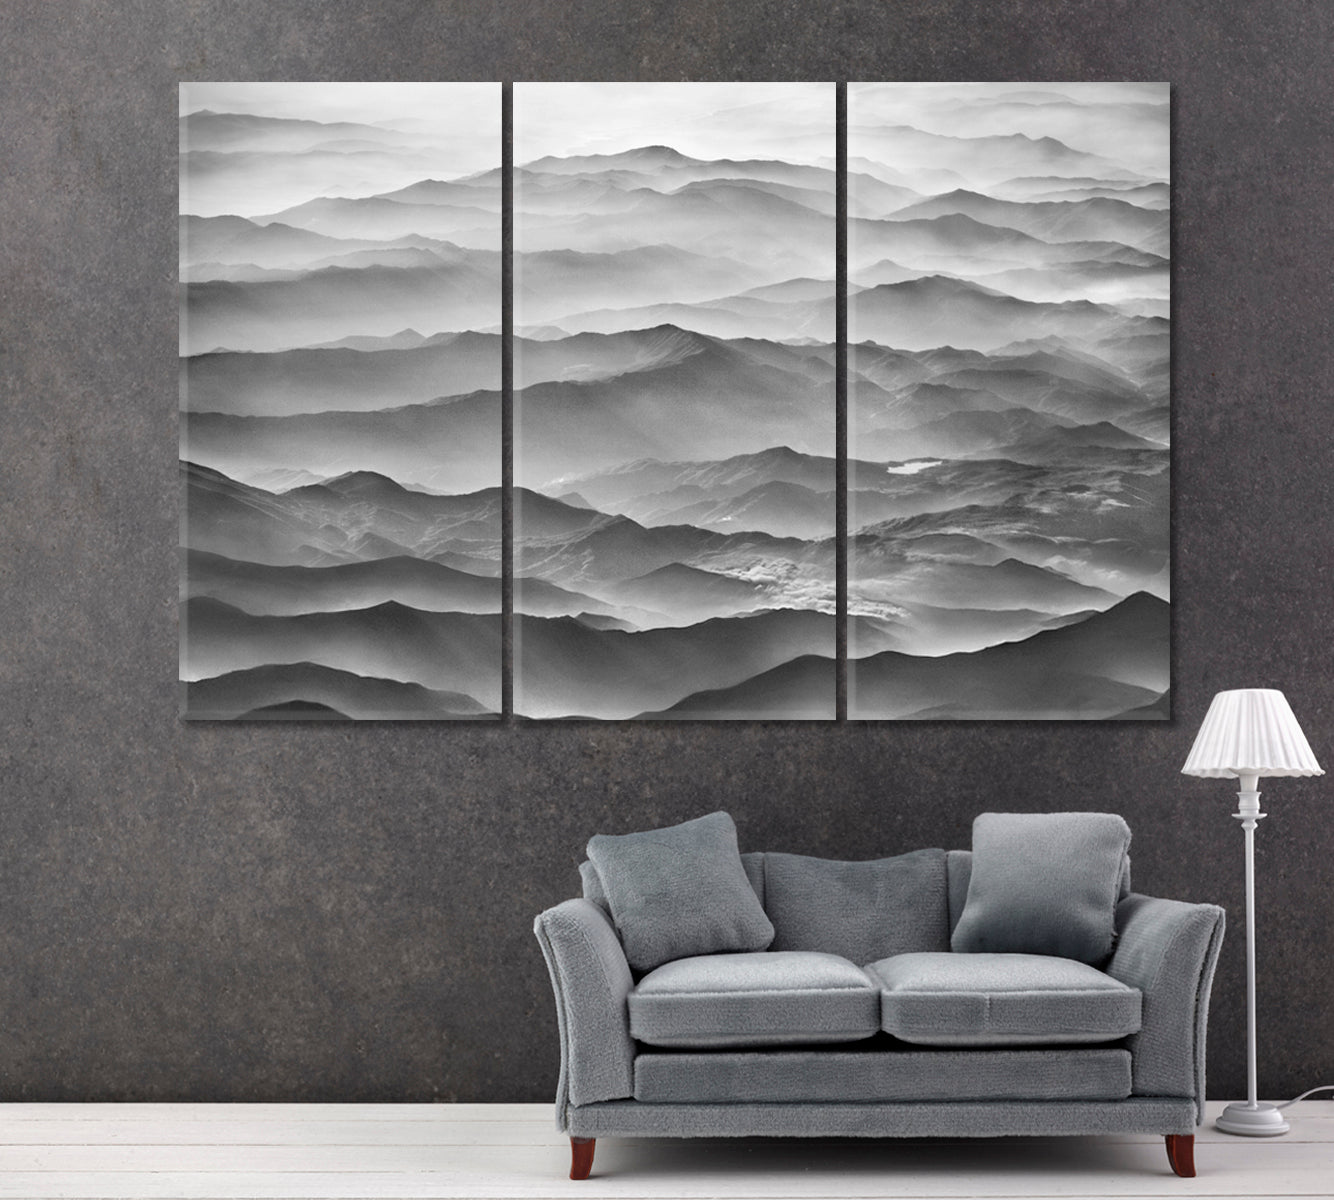 Foggy Mountain on Black And White Canvas Print ArtLexy 3 Panels 36"x24" inches 